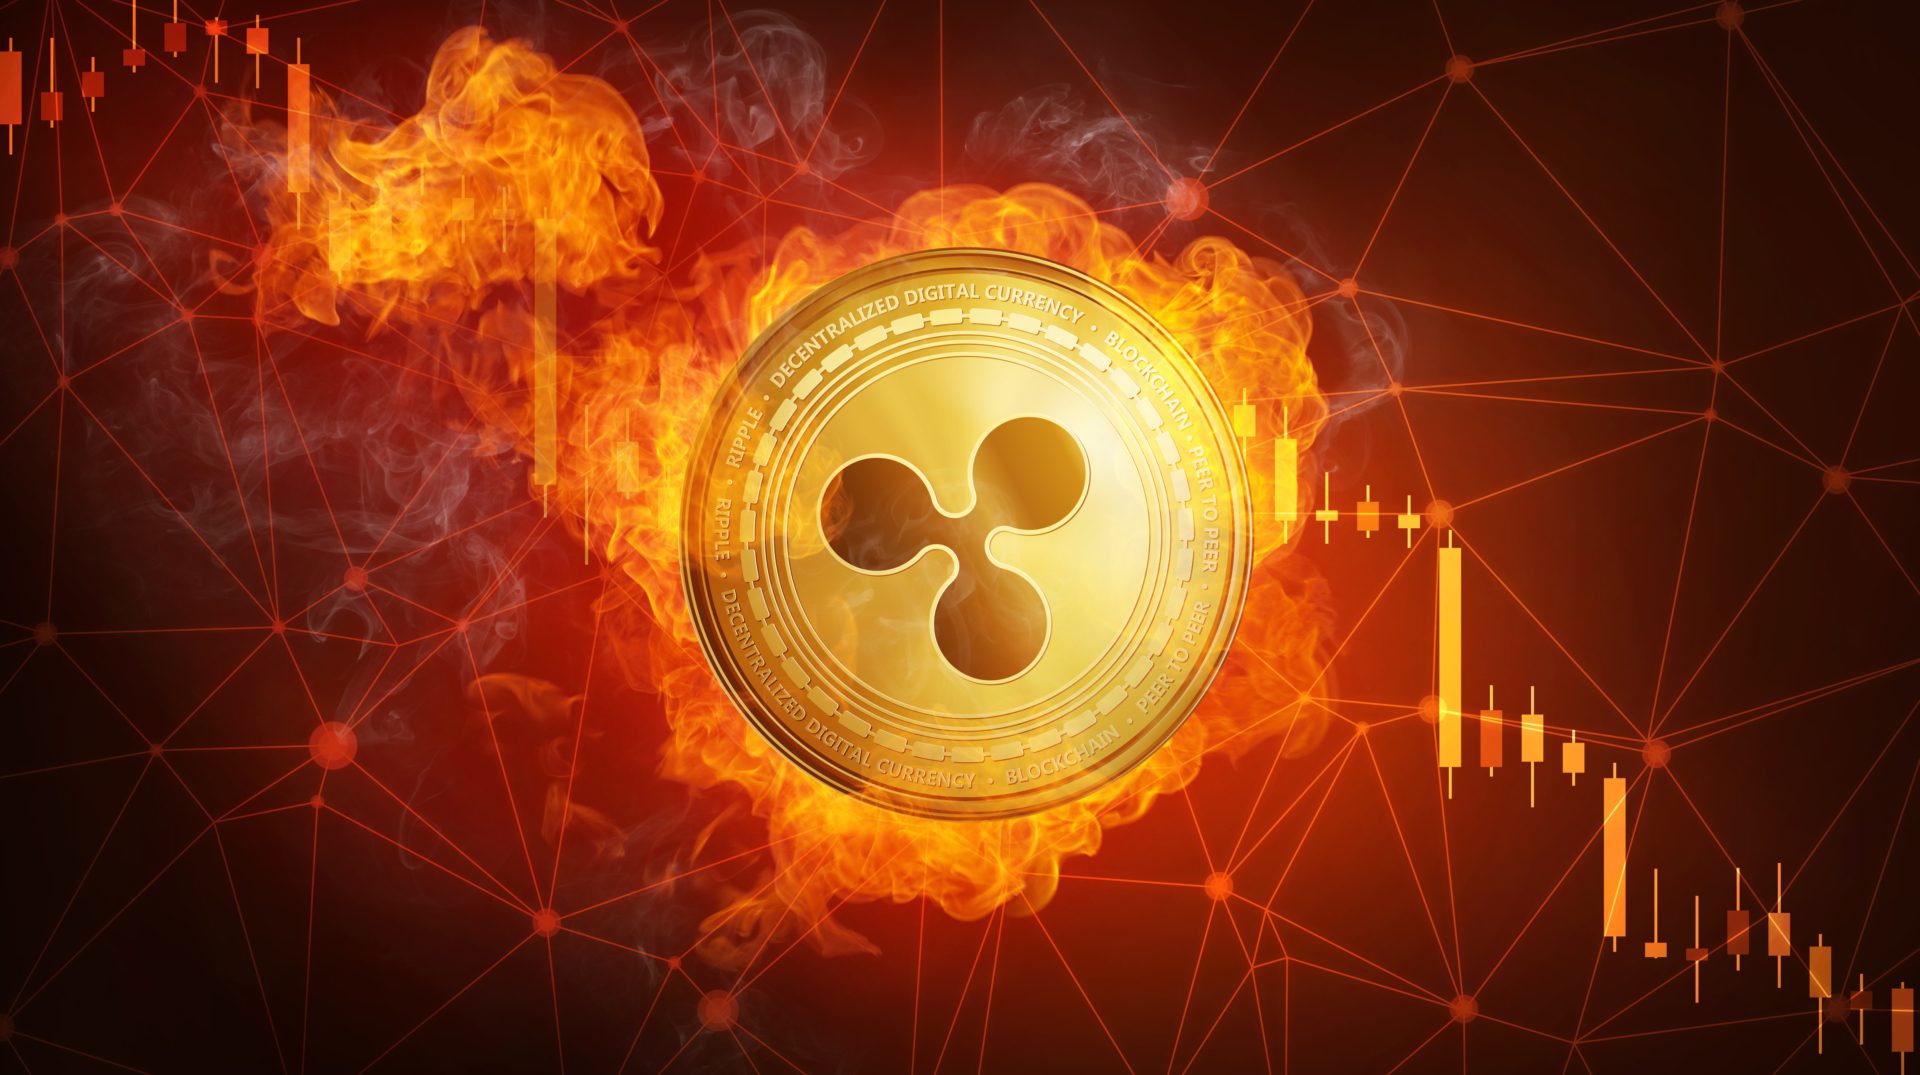 XRP Price Breakdown: Crypto Analyst Highlights Key Levels to Watch